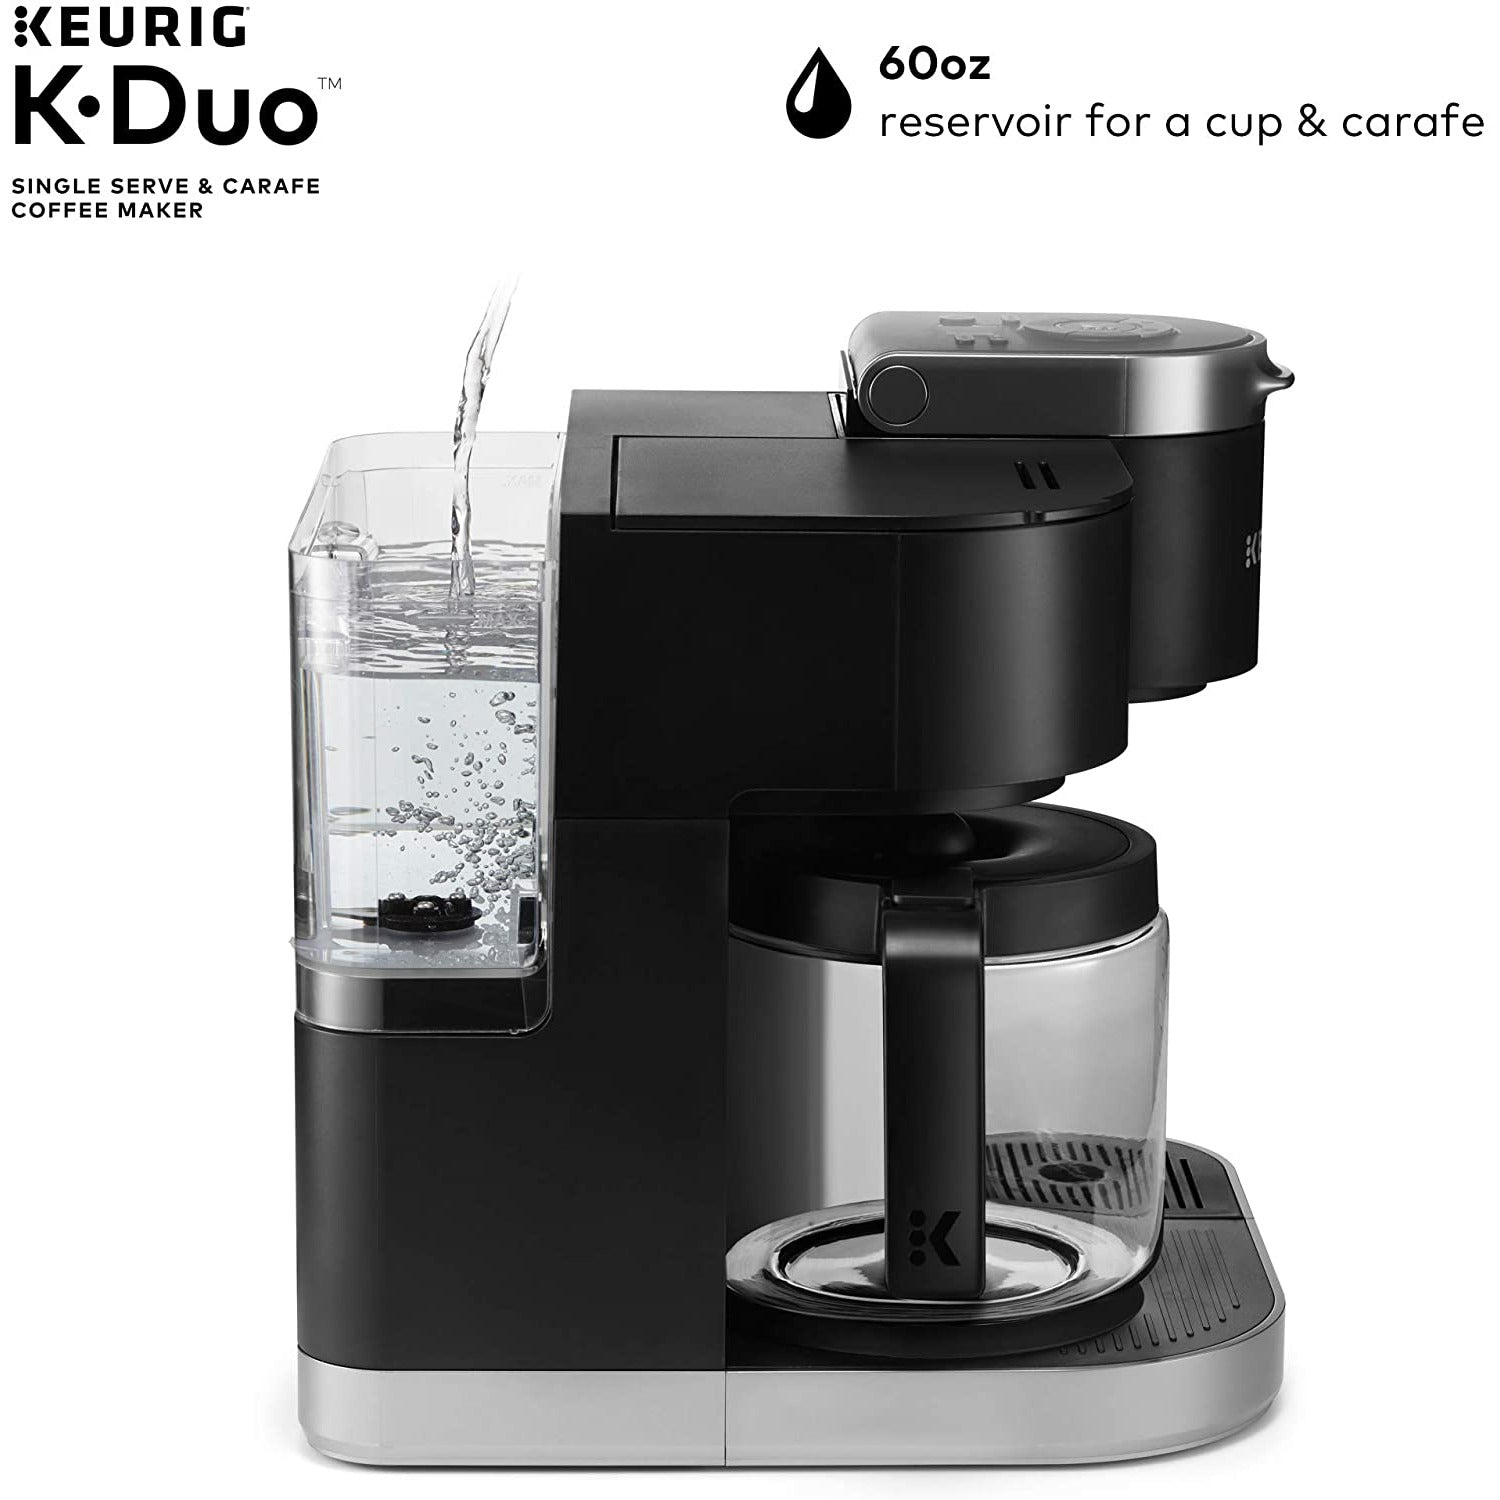  Keurig K-Duo Coffee Maker, Single Serve K-Cup Pod and